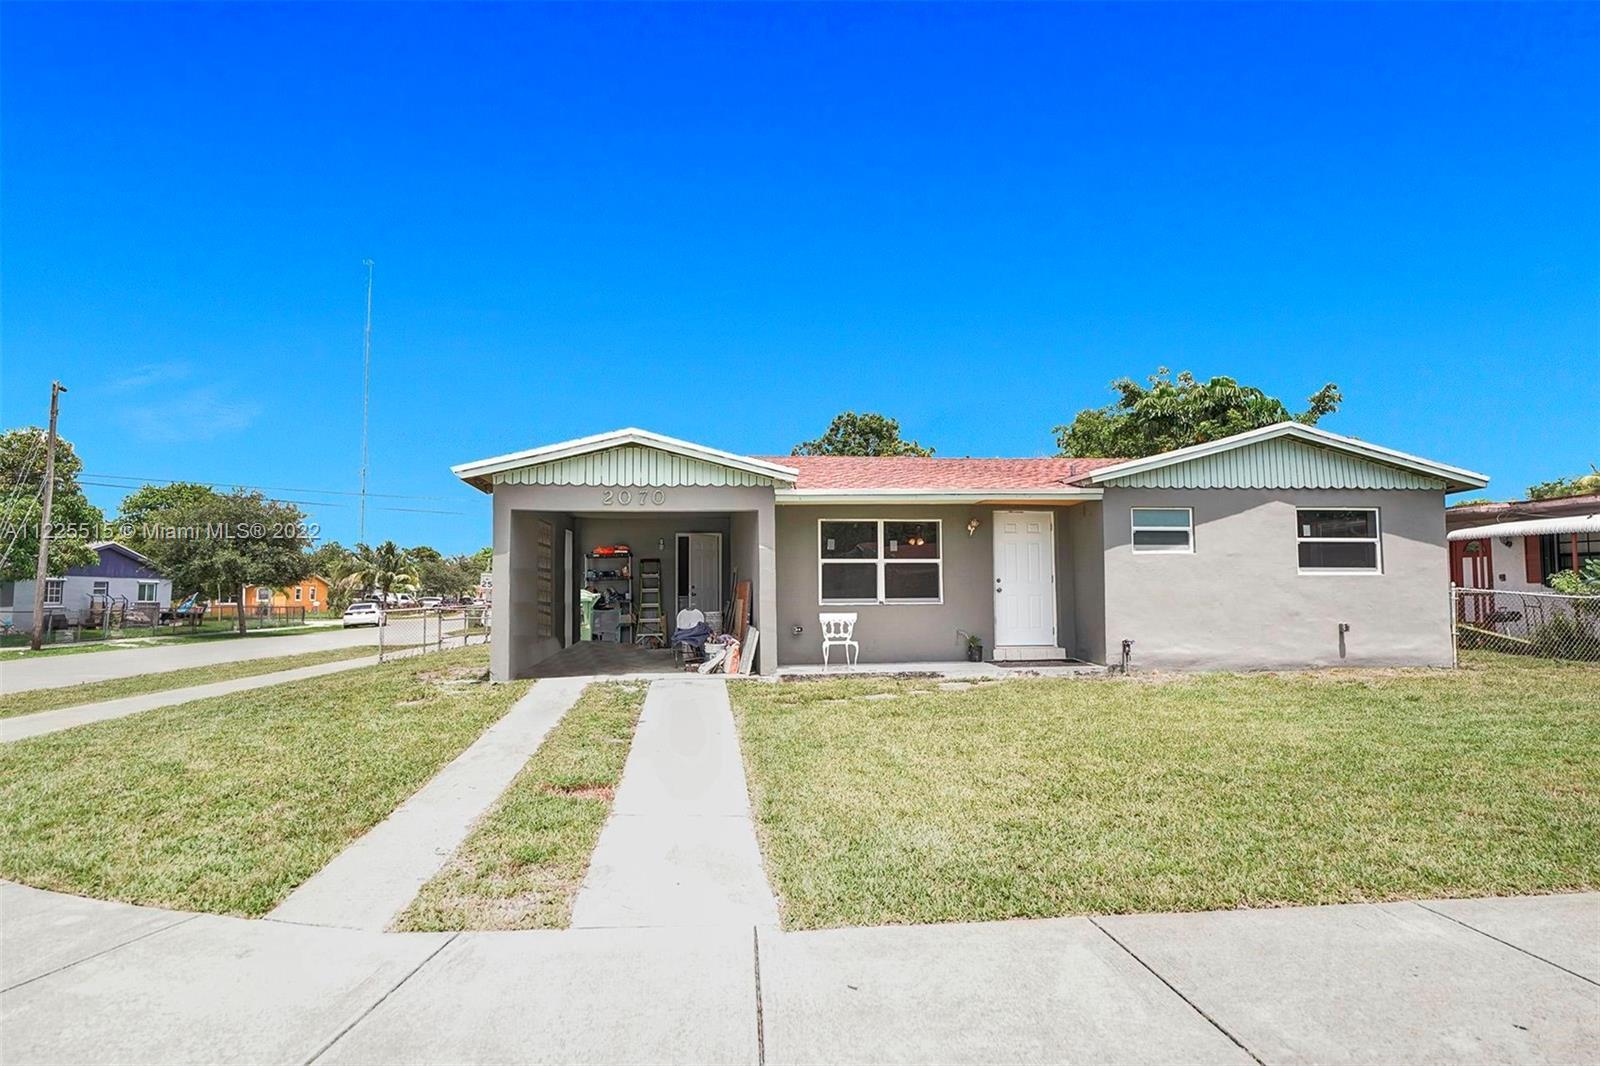 Come experience this beautifully updated home in Fort Lauderdale with a total 3 bedrooms, 3 bathroom